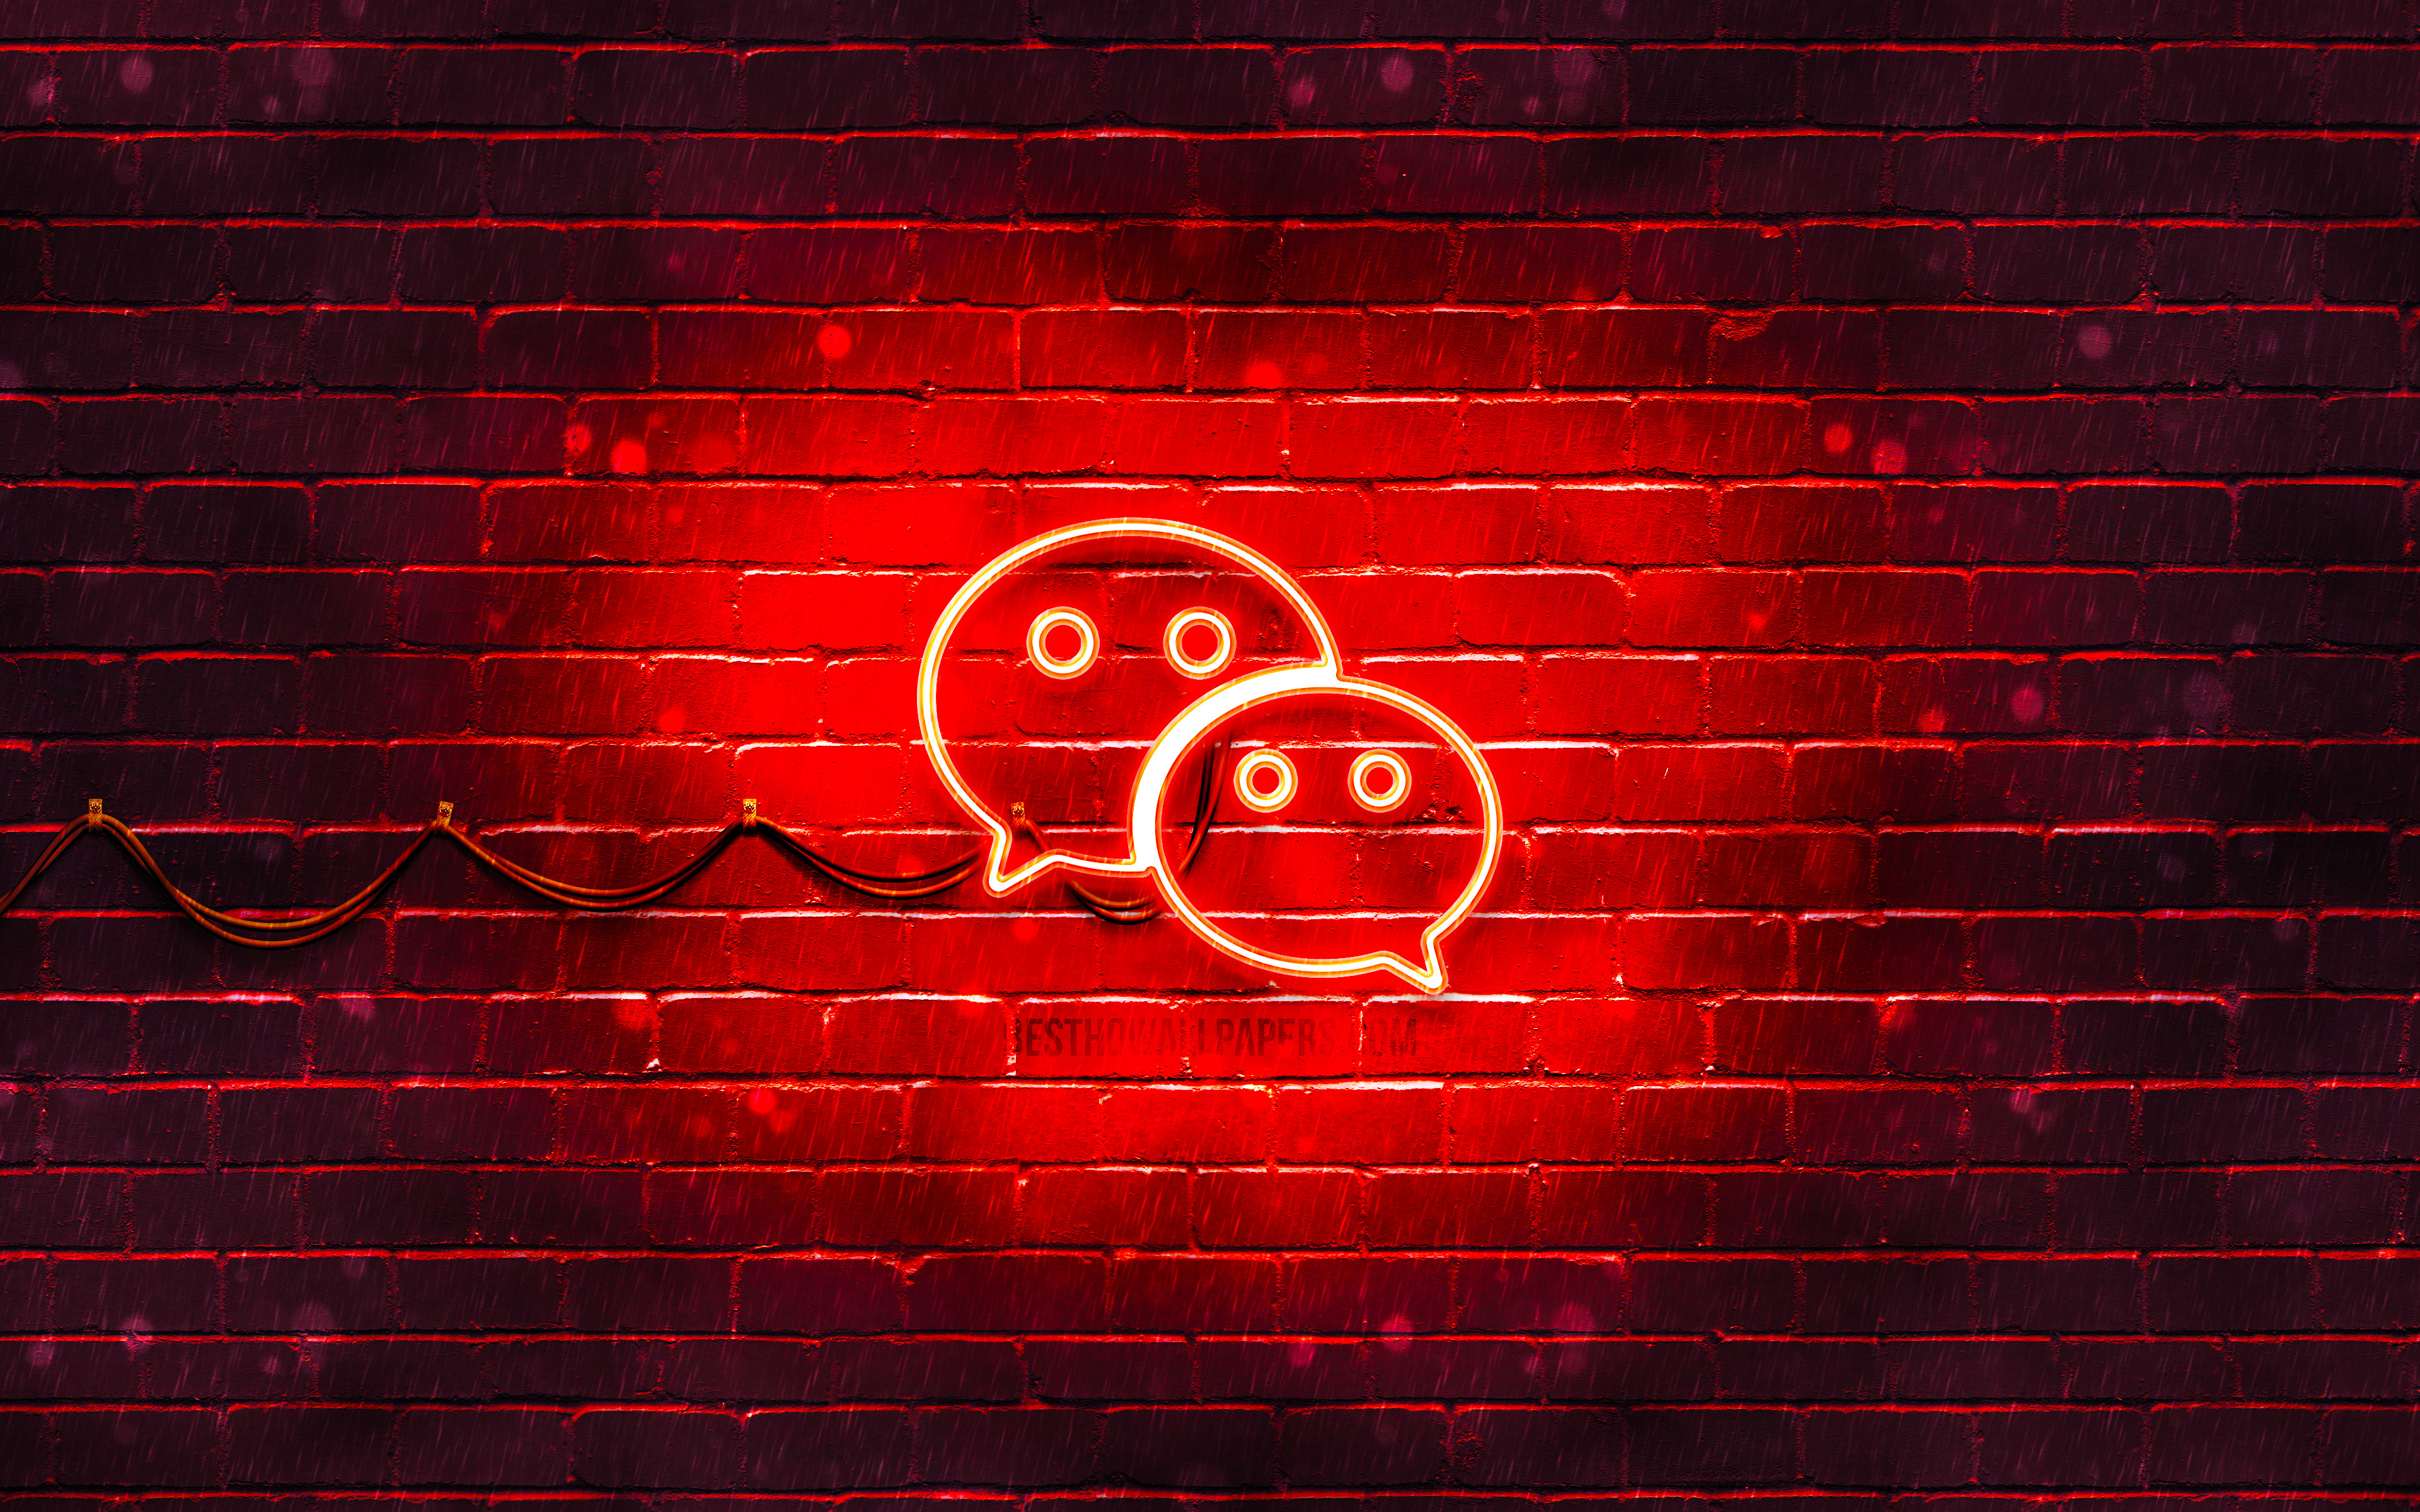 Download wallpaper WeChat red logo, 4k, red brickwall, WeChat logo, social networks, WeChat neon logo, WeChat for desktop with resolution 3840x2400. High Quality HD picture wallpaper